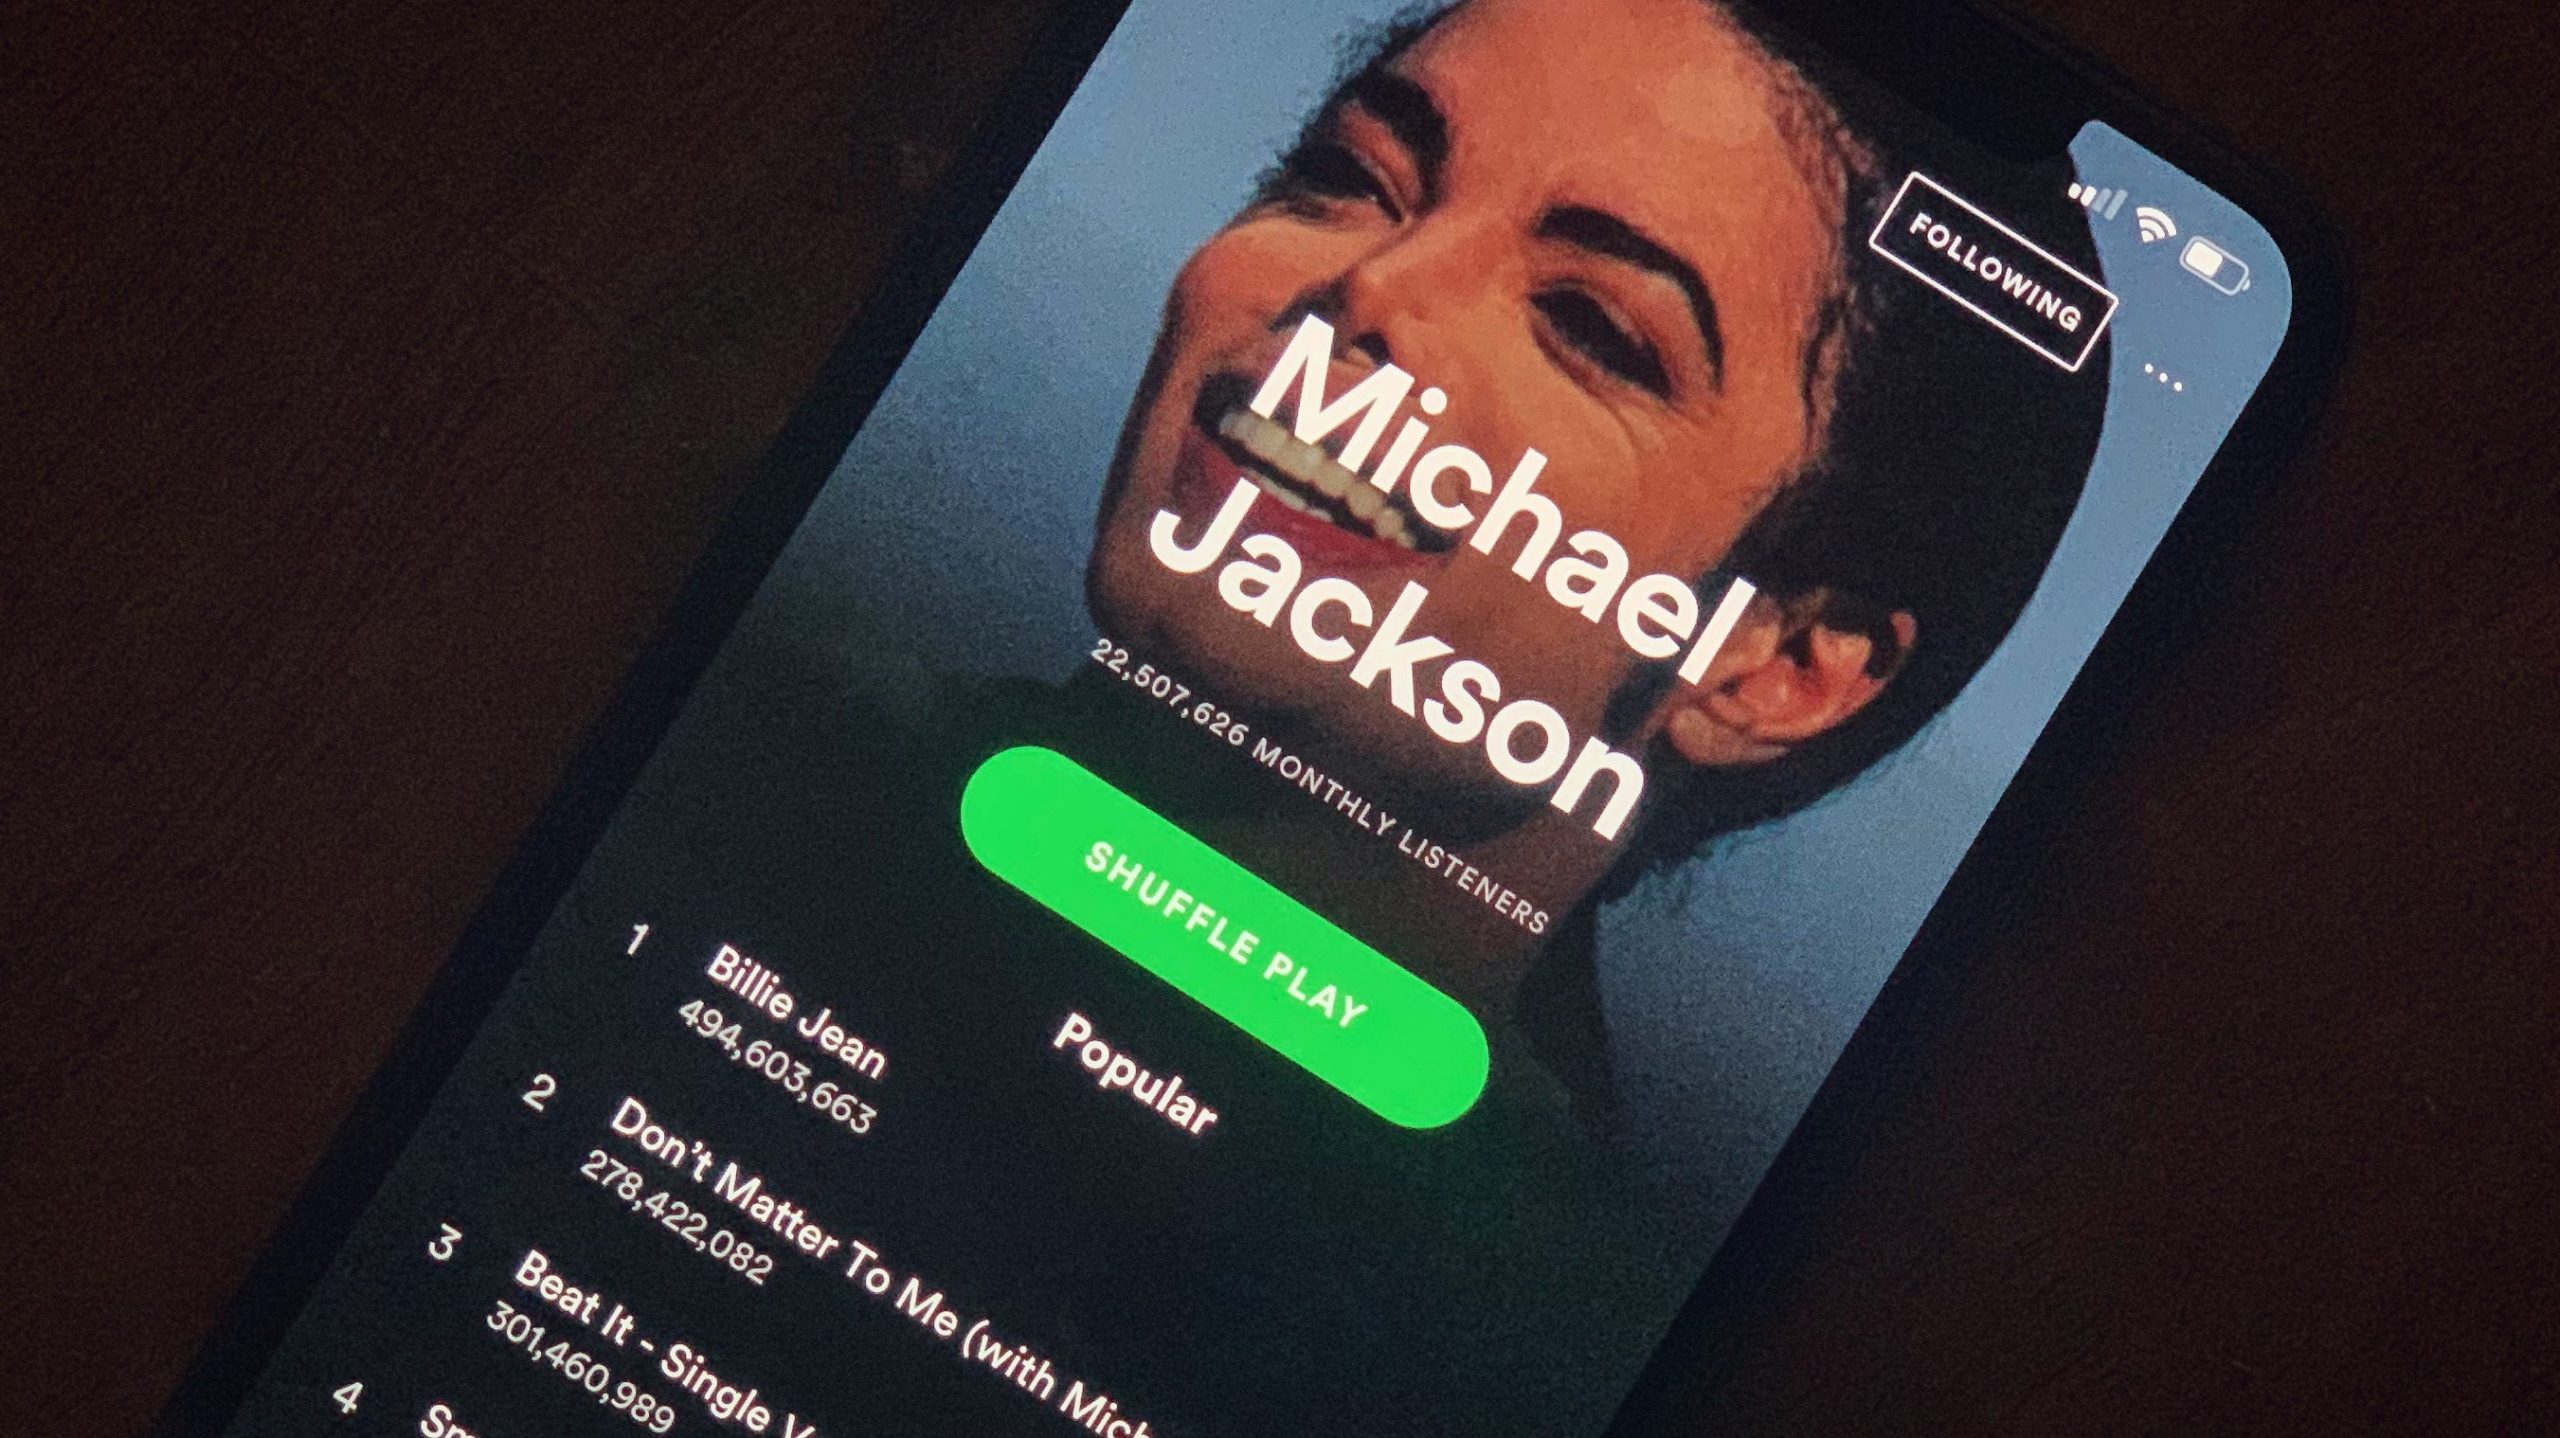 Michael’s Streaming Up Since Documentary